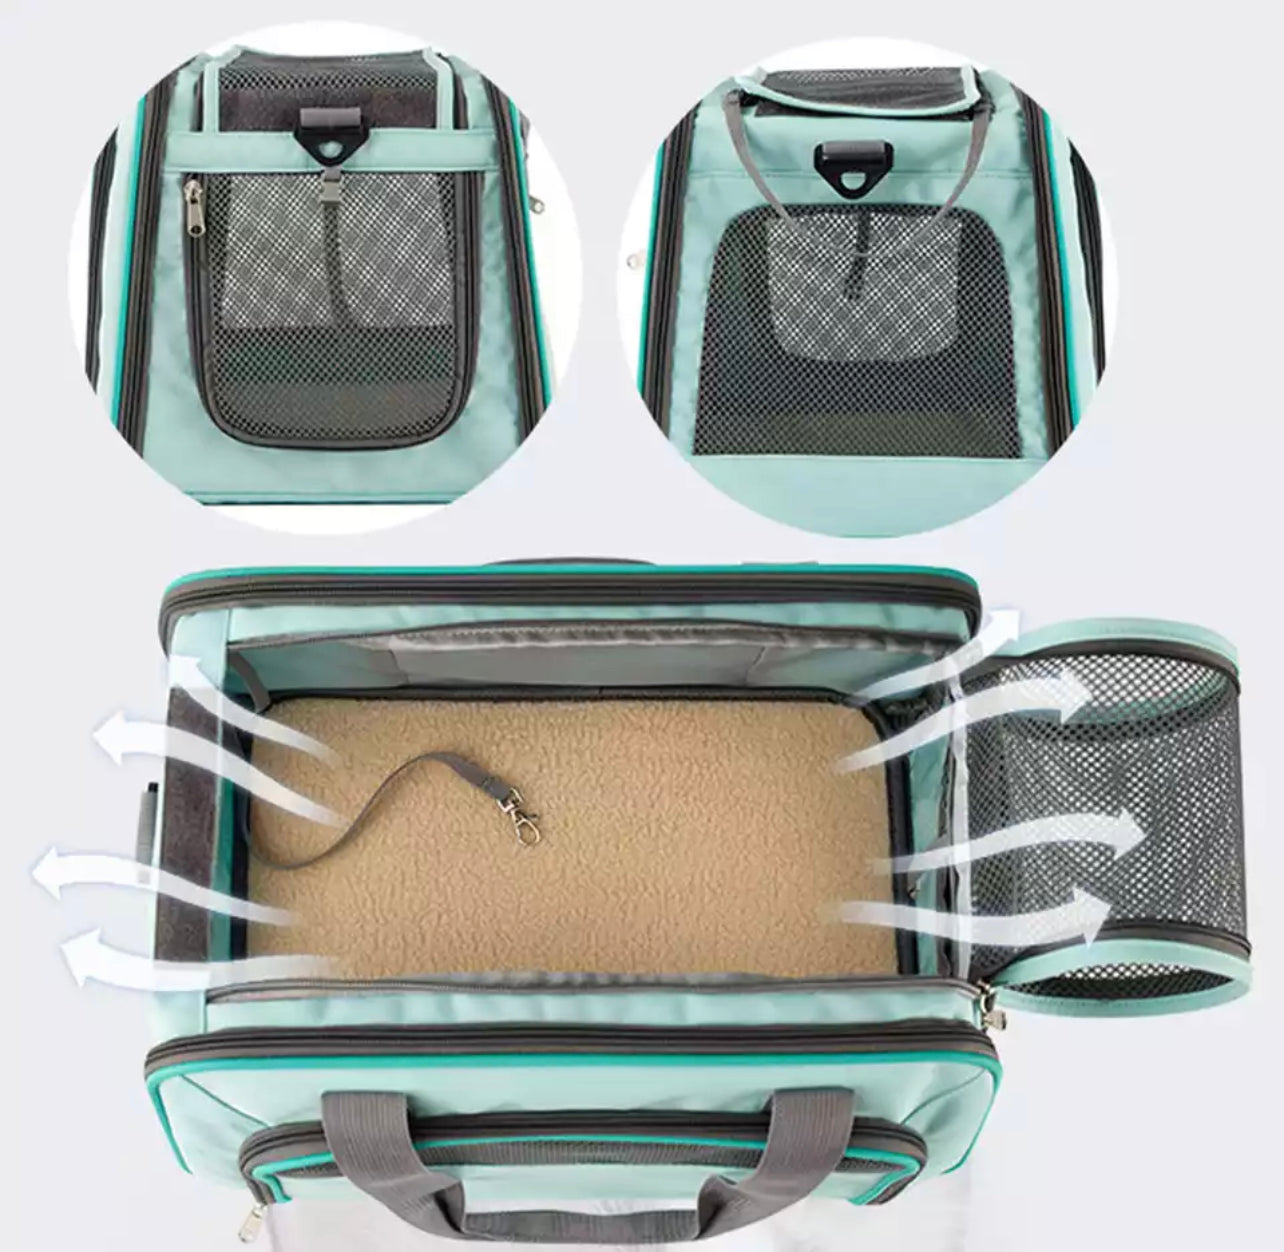 Soft-sided Pet Travel Carrier - Turquoise